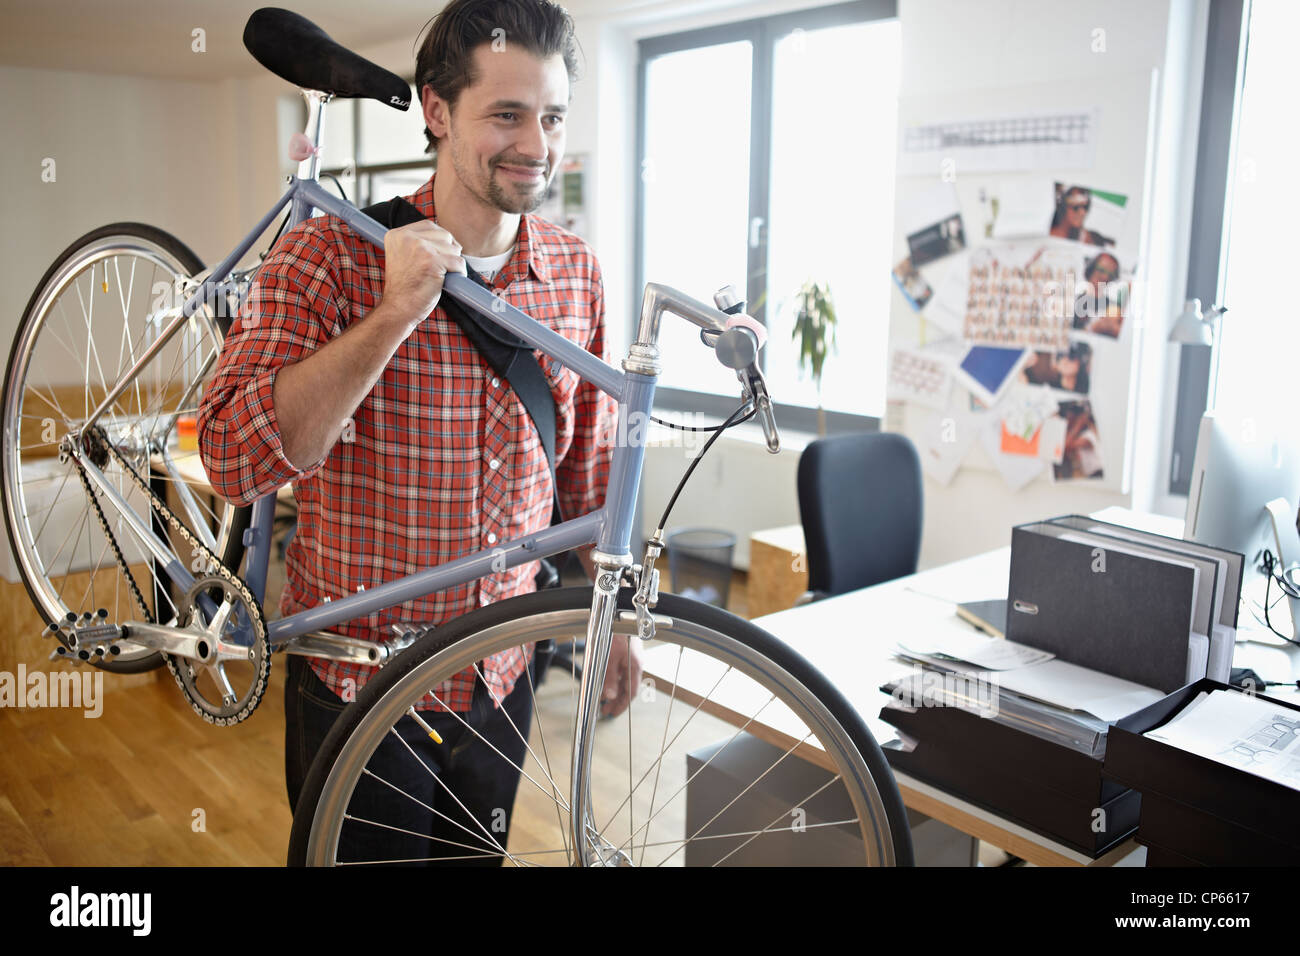 Germany, Cologne, young man carrying bicycle, smiling Banque D'Images